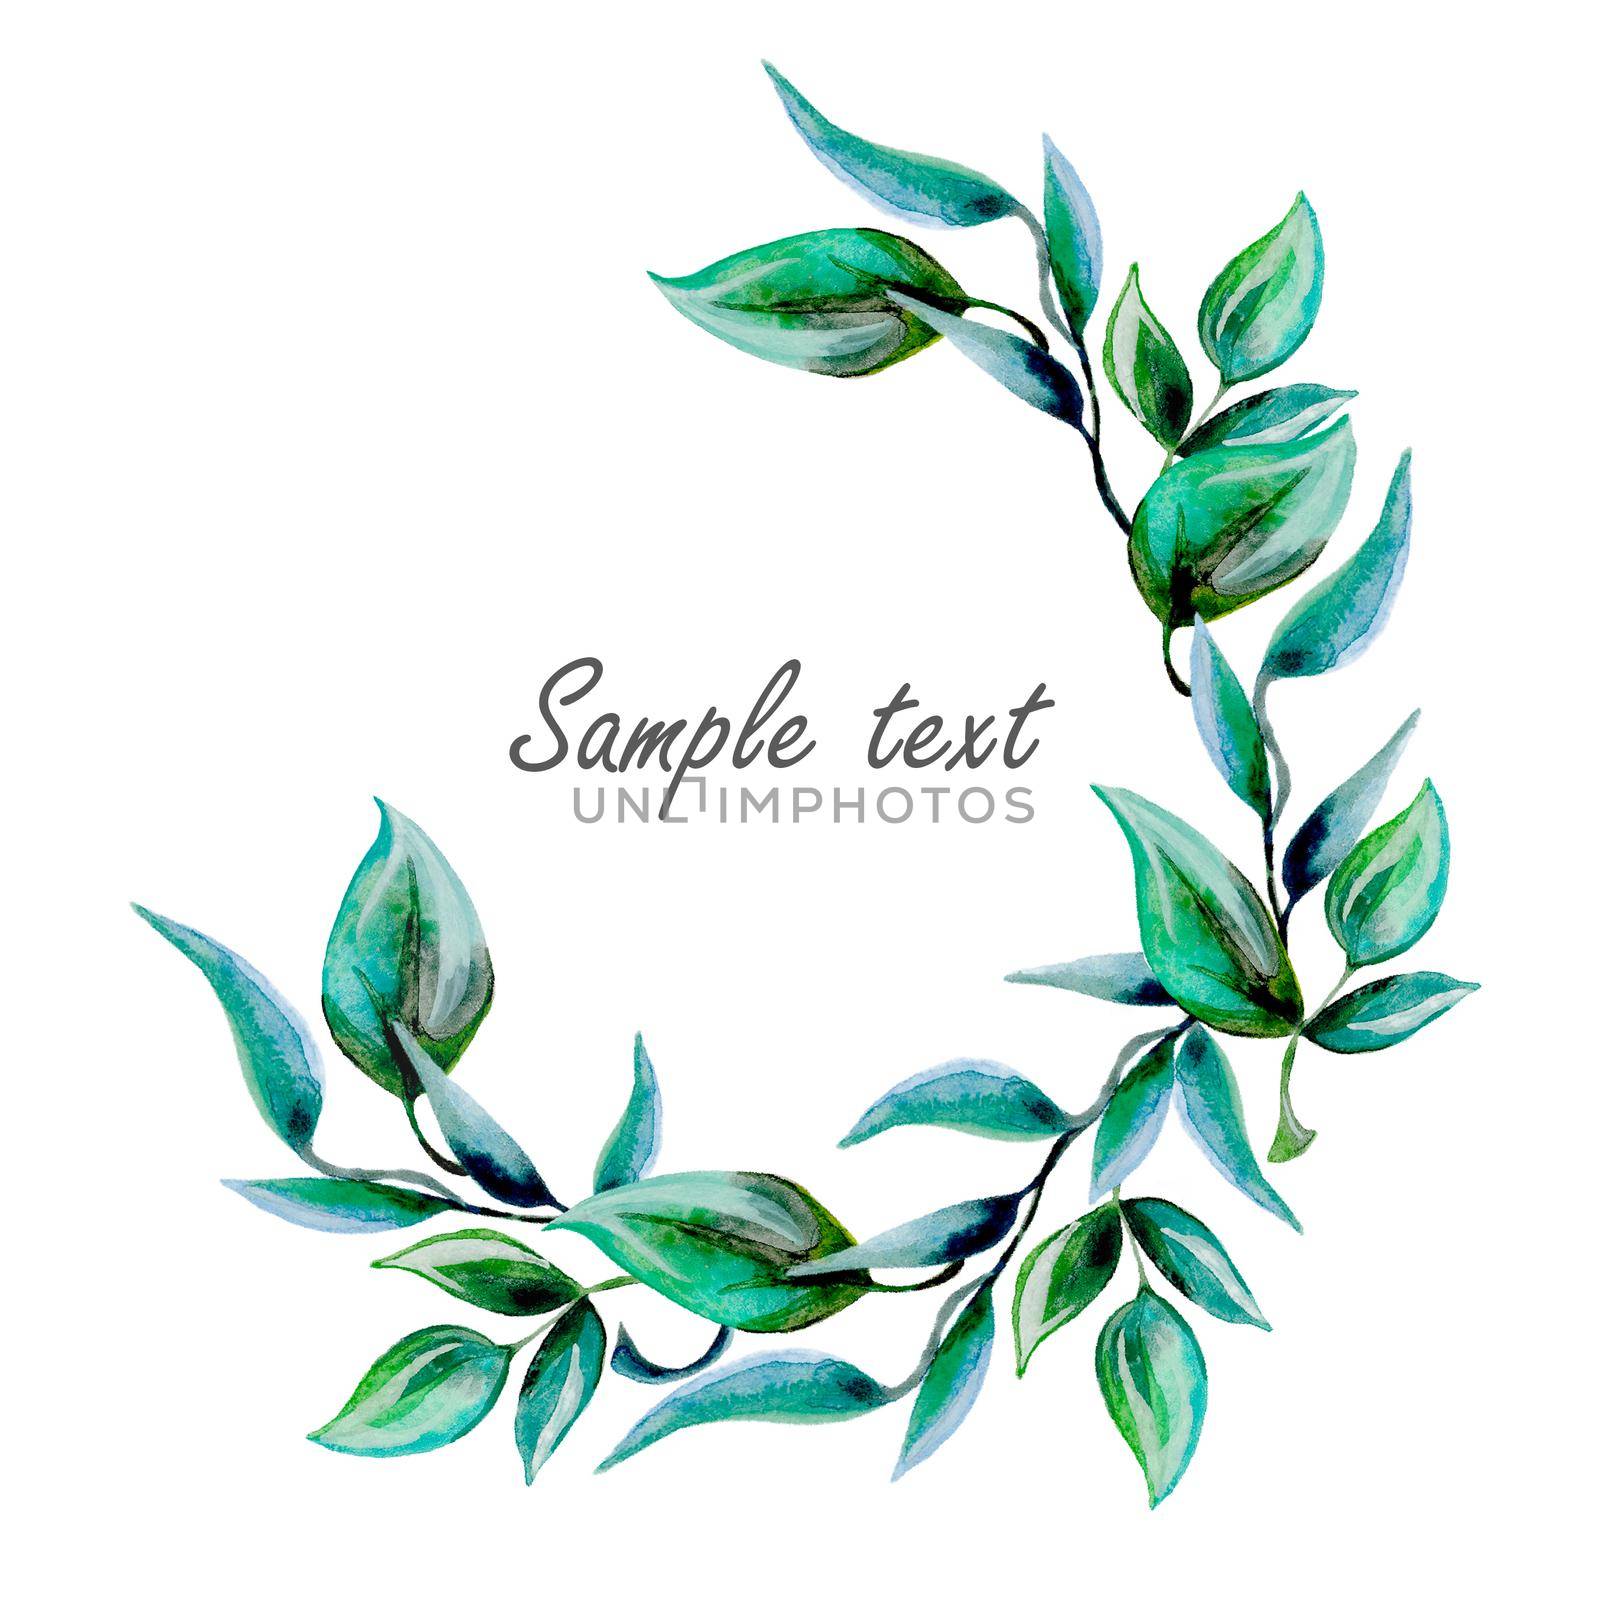 Frame round template with green leaves and place for text. Watercolor illustration by fireFLYart